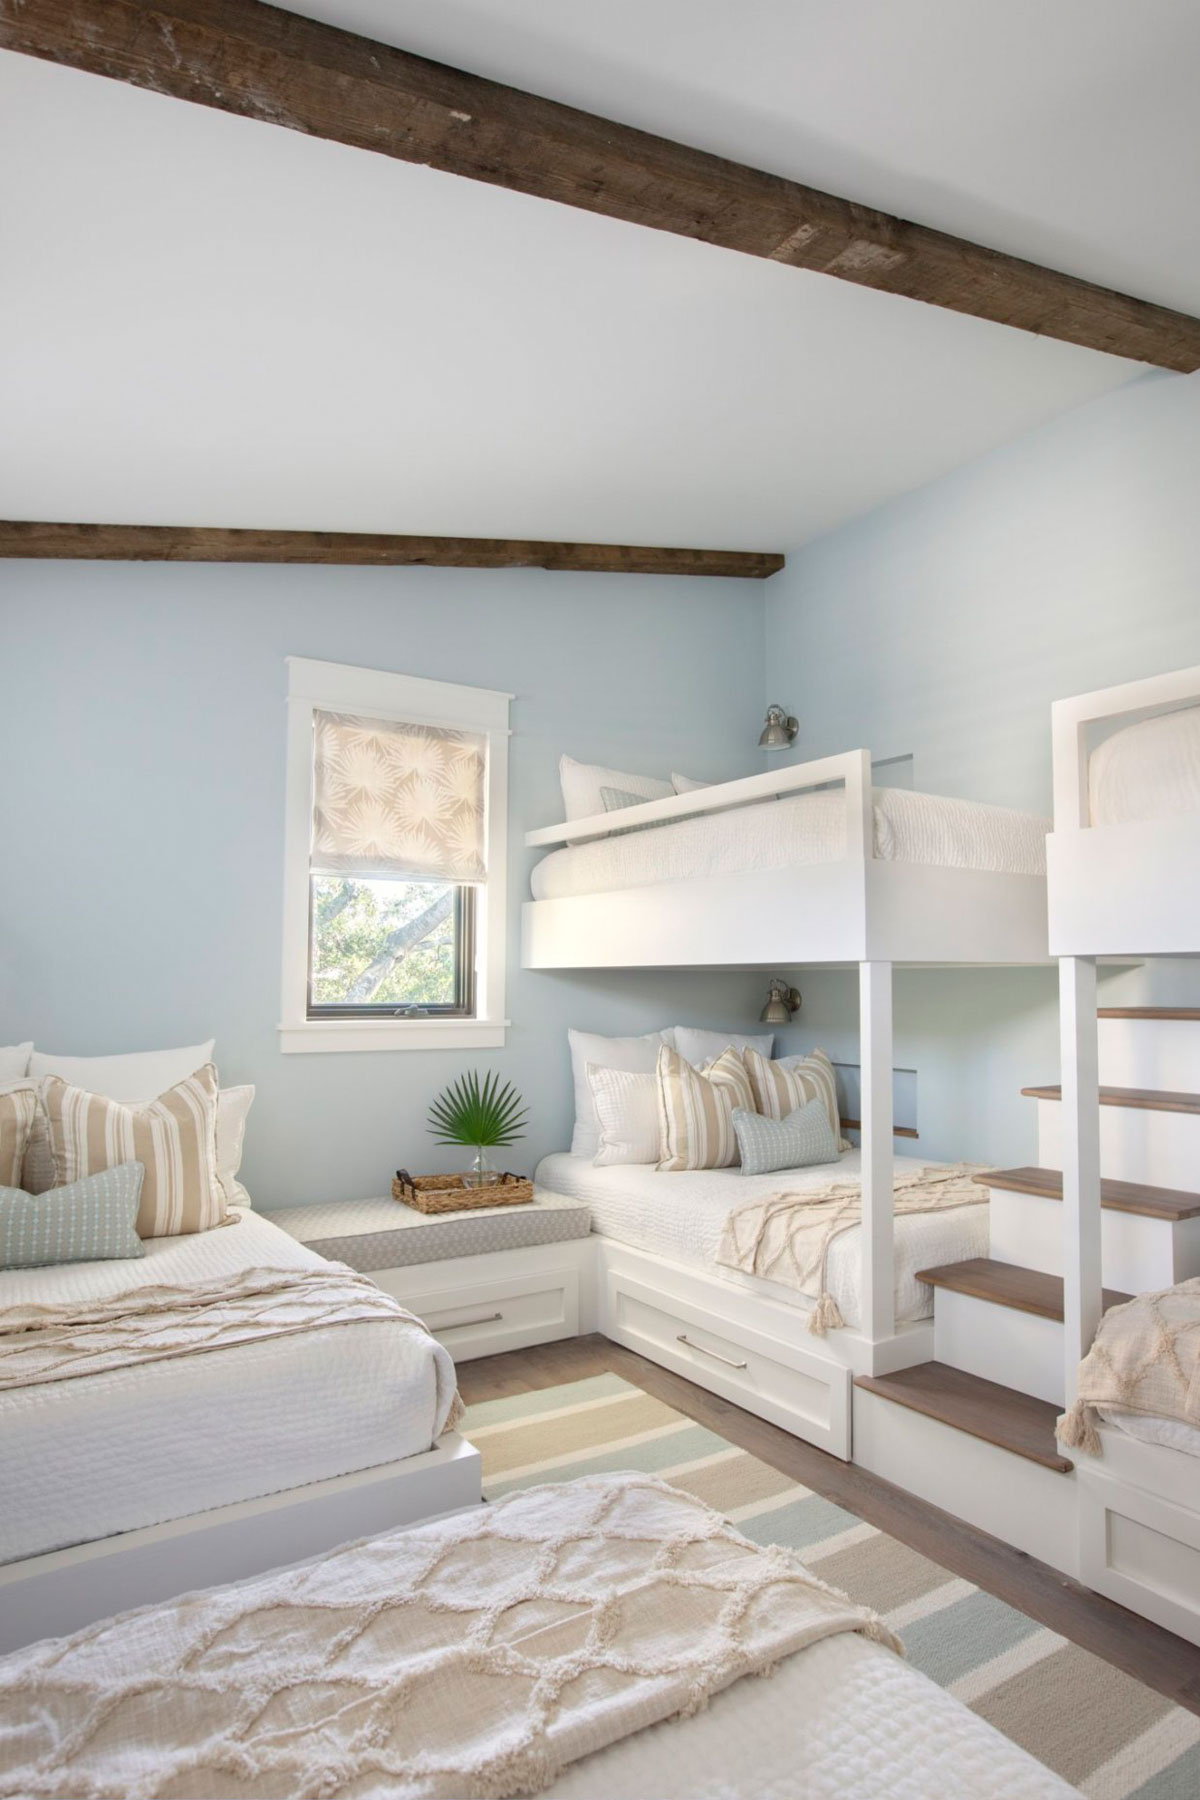 Custom bunk beds in bunk room of new construction home designed by Swallowtail Architecture